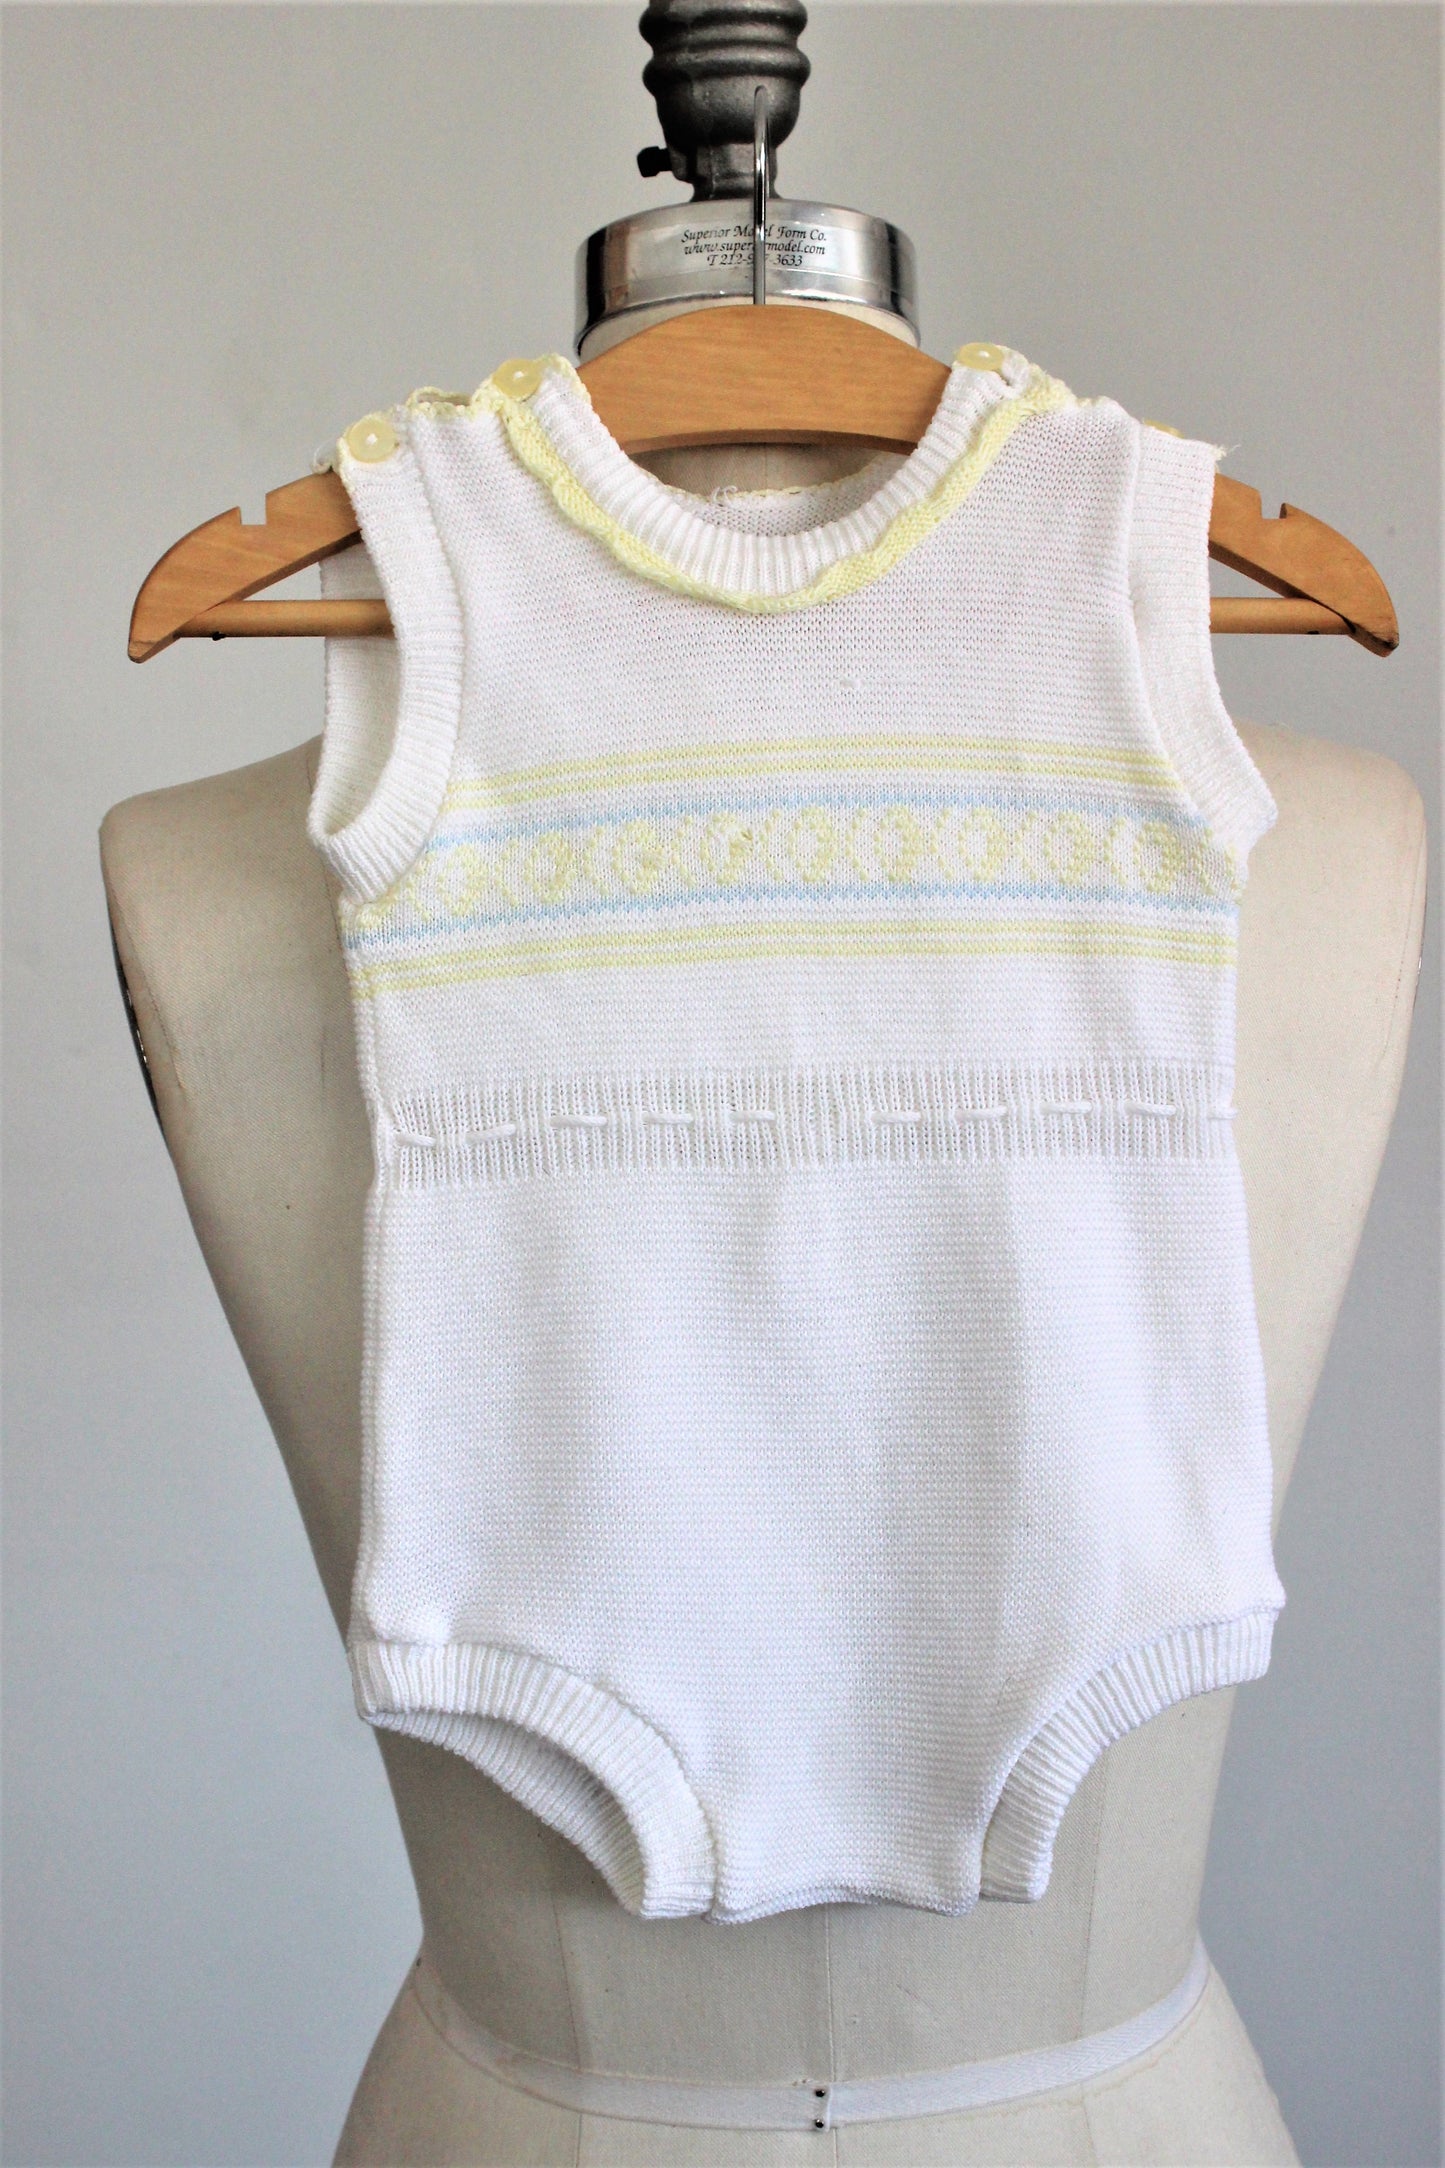 Vintage 1970s Baby Onesie Outfit Boy Or Unisex 